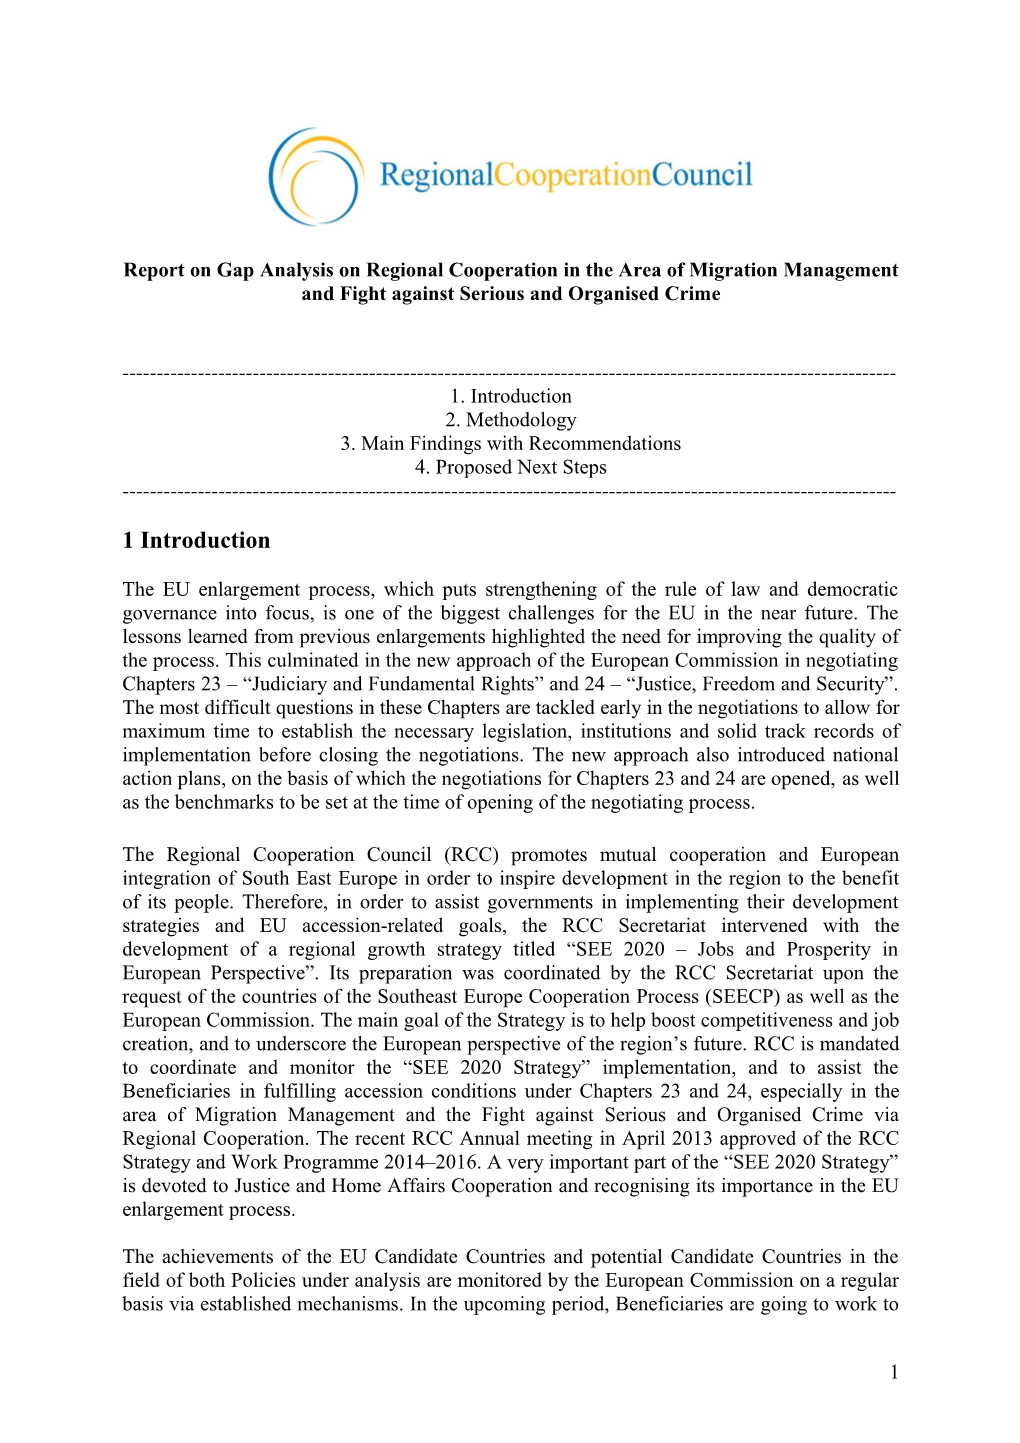 Draft Report on Gap Analysis on Regional Cooperation in the Area of Migration Management